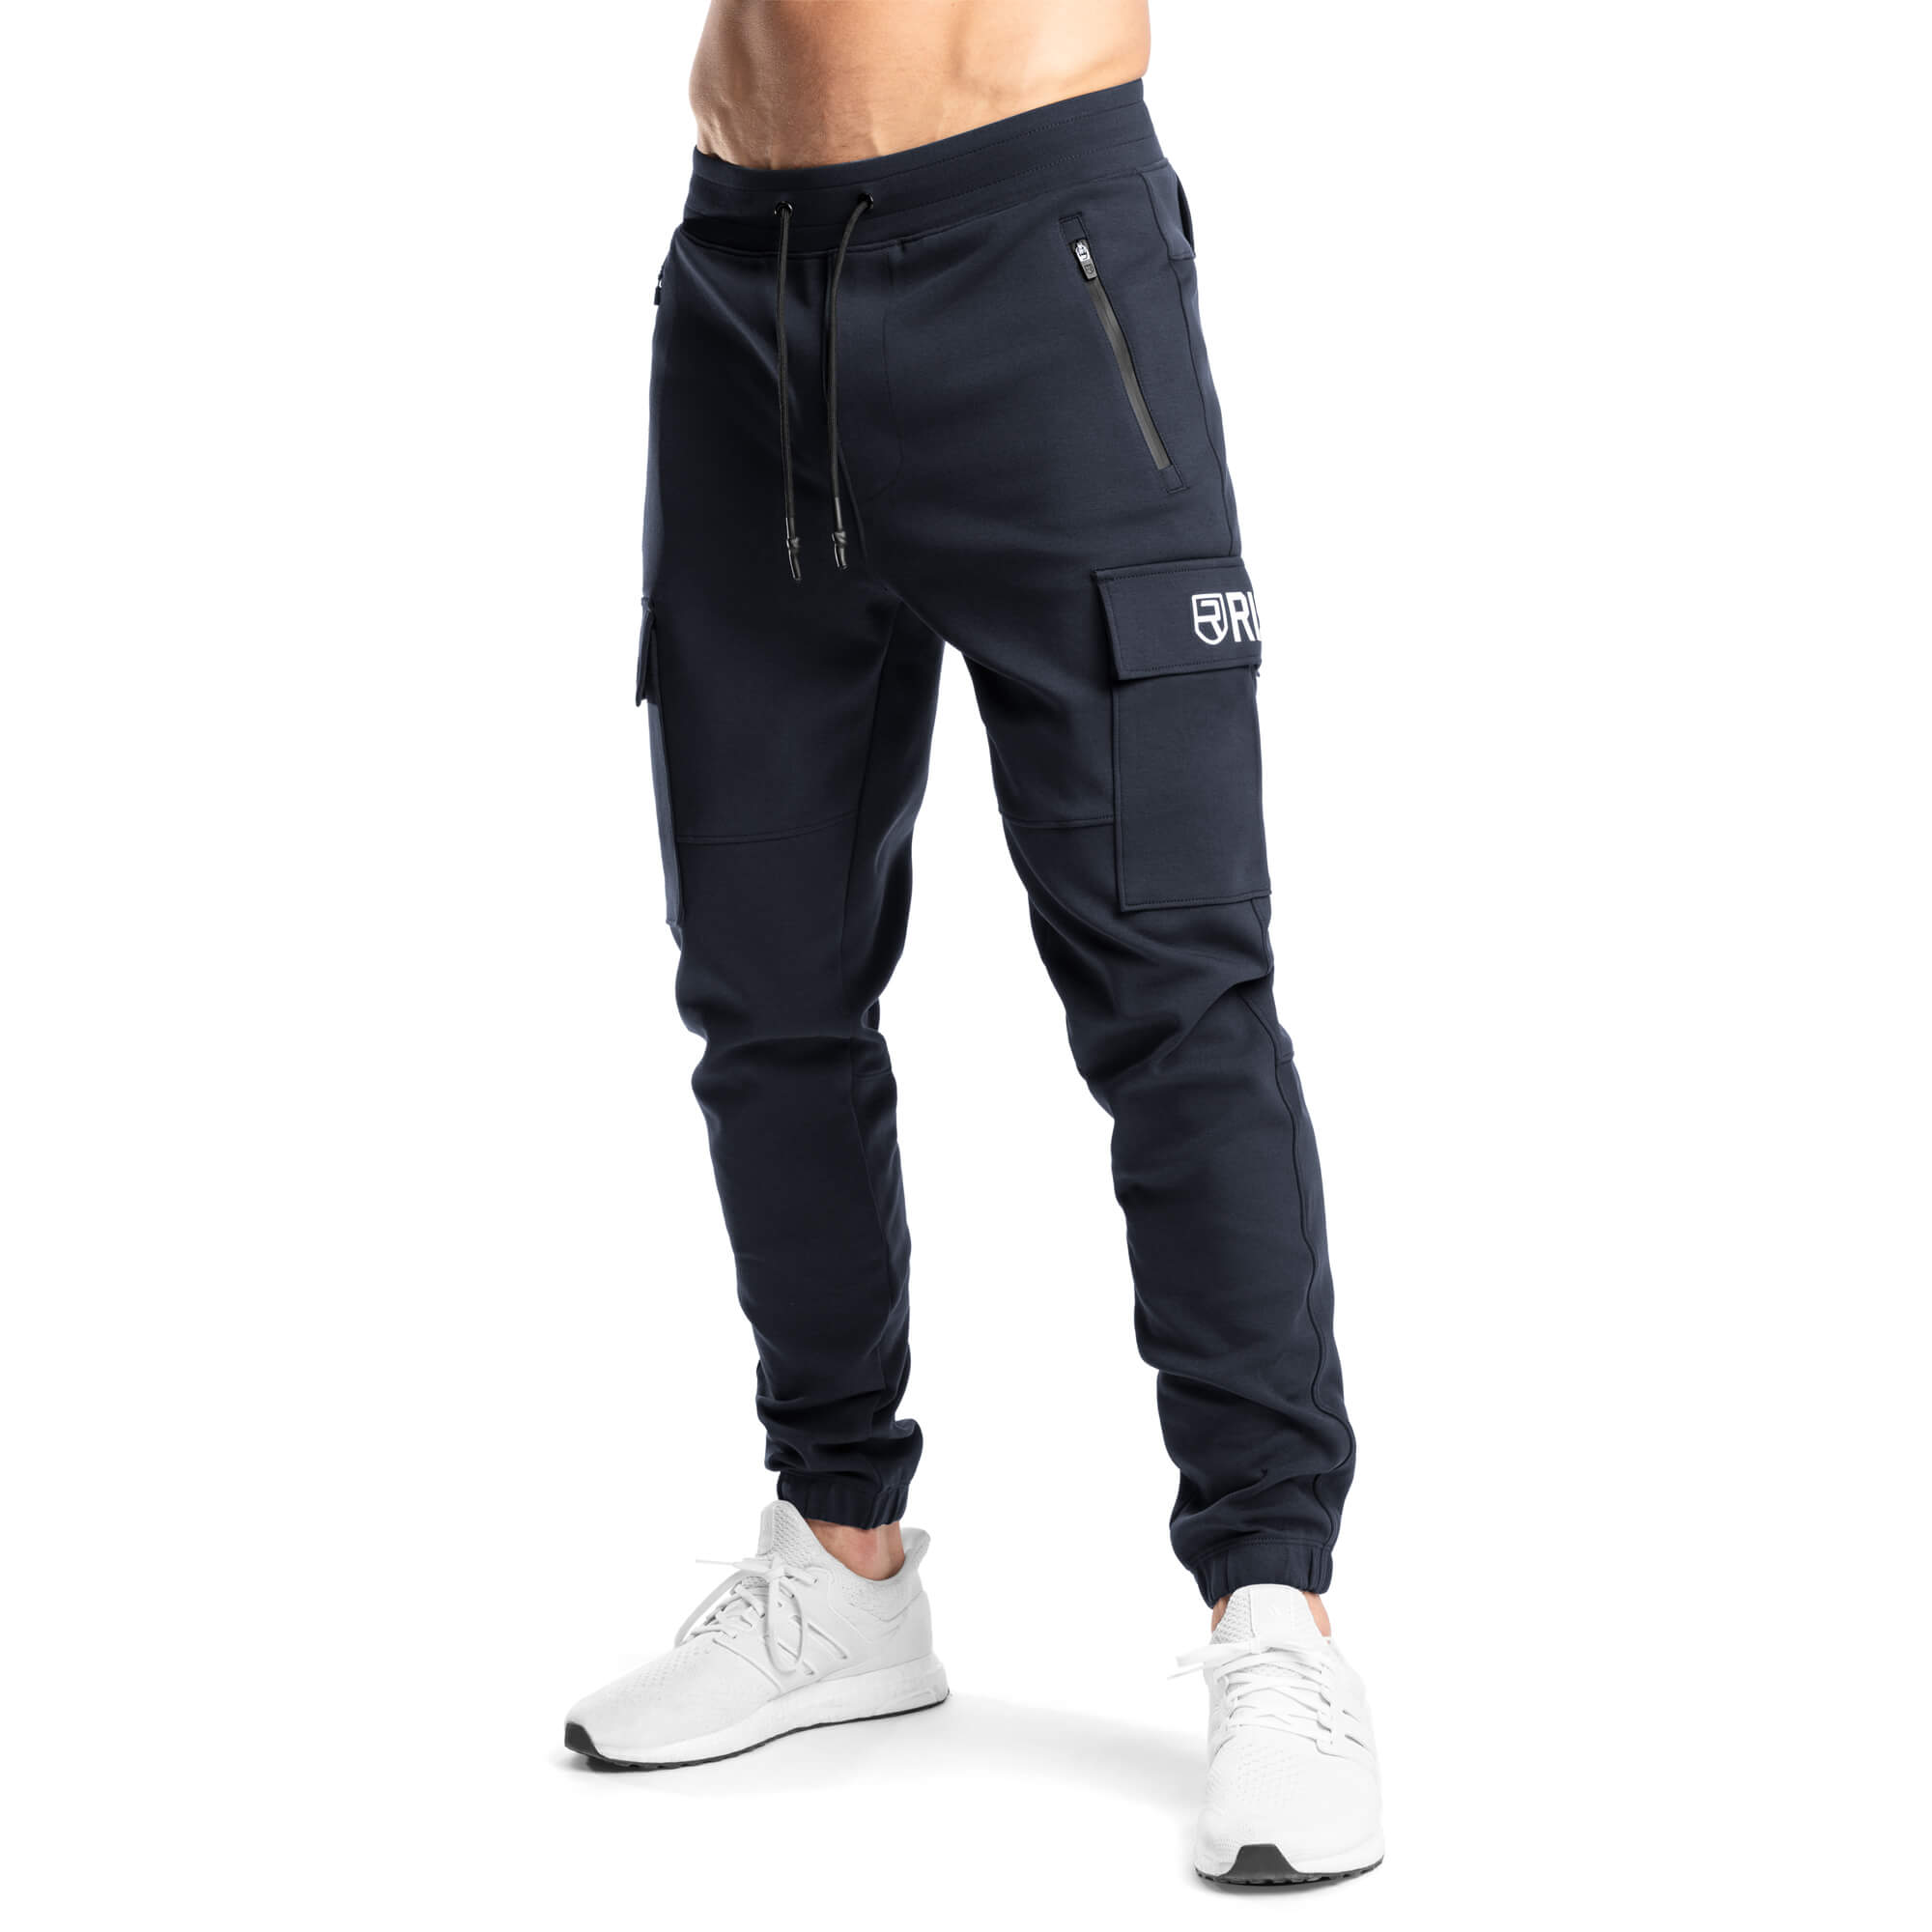 Rest Later Pants - Black - Rise Canada